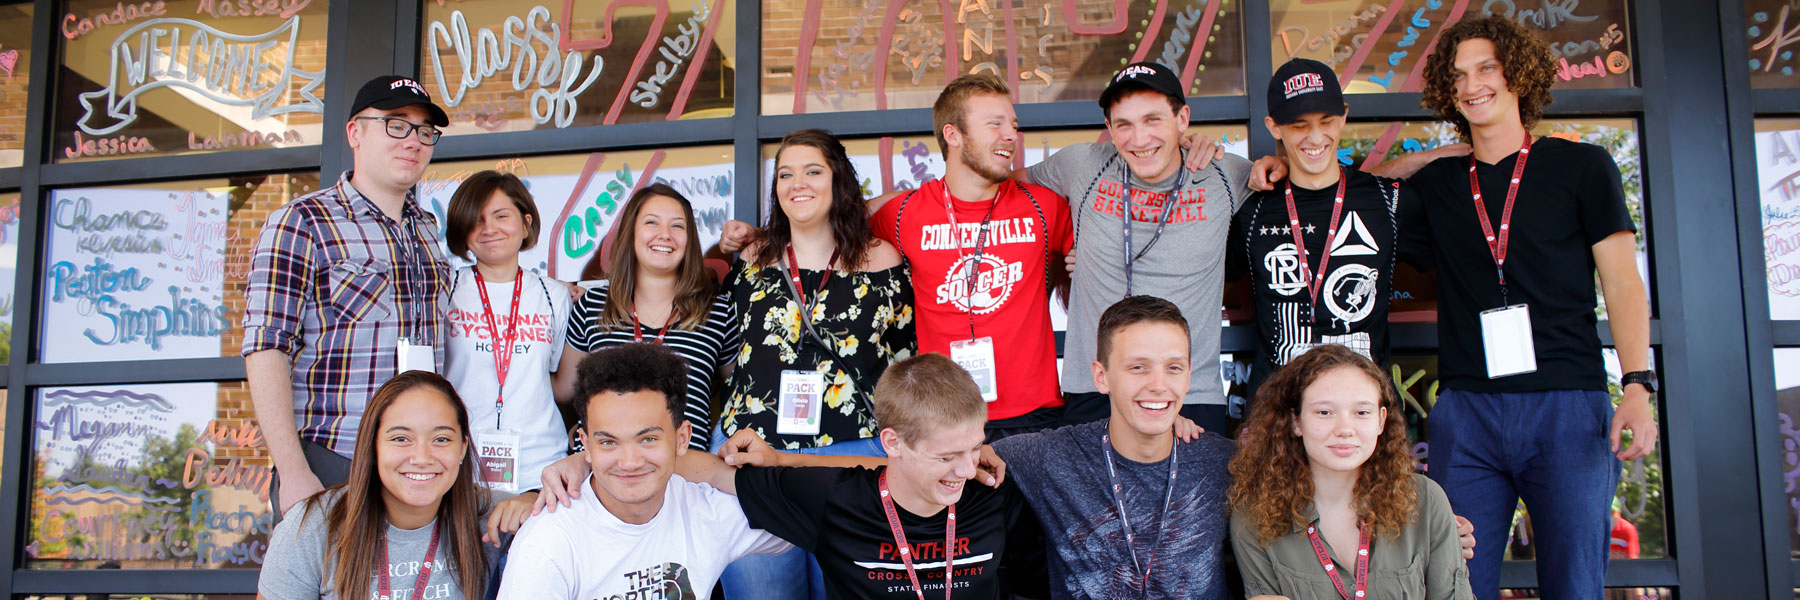 Group of diverse teens wearing id badges poses in front of a wall of windows decorated with art and graphics.